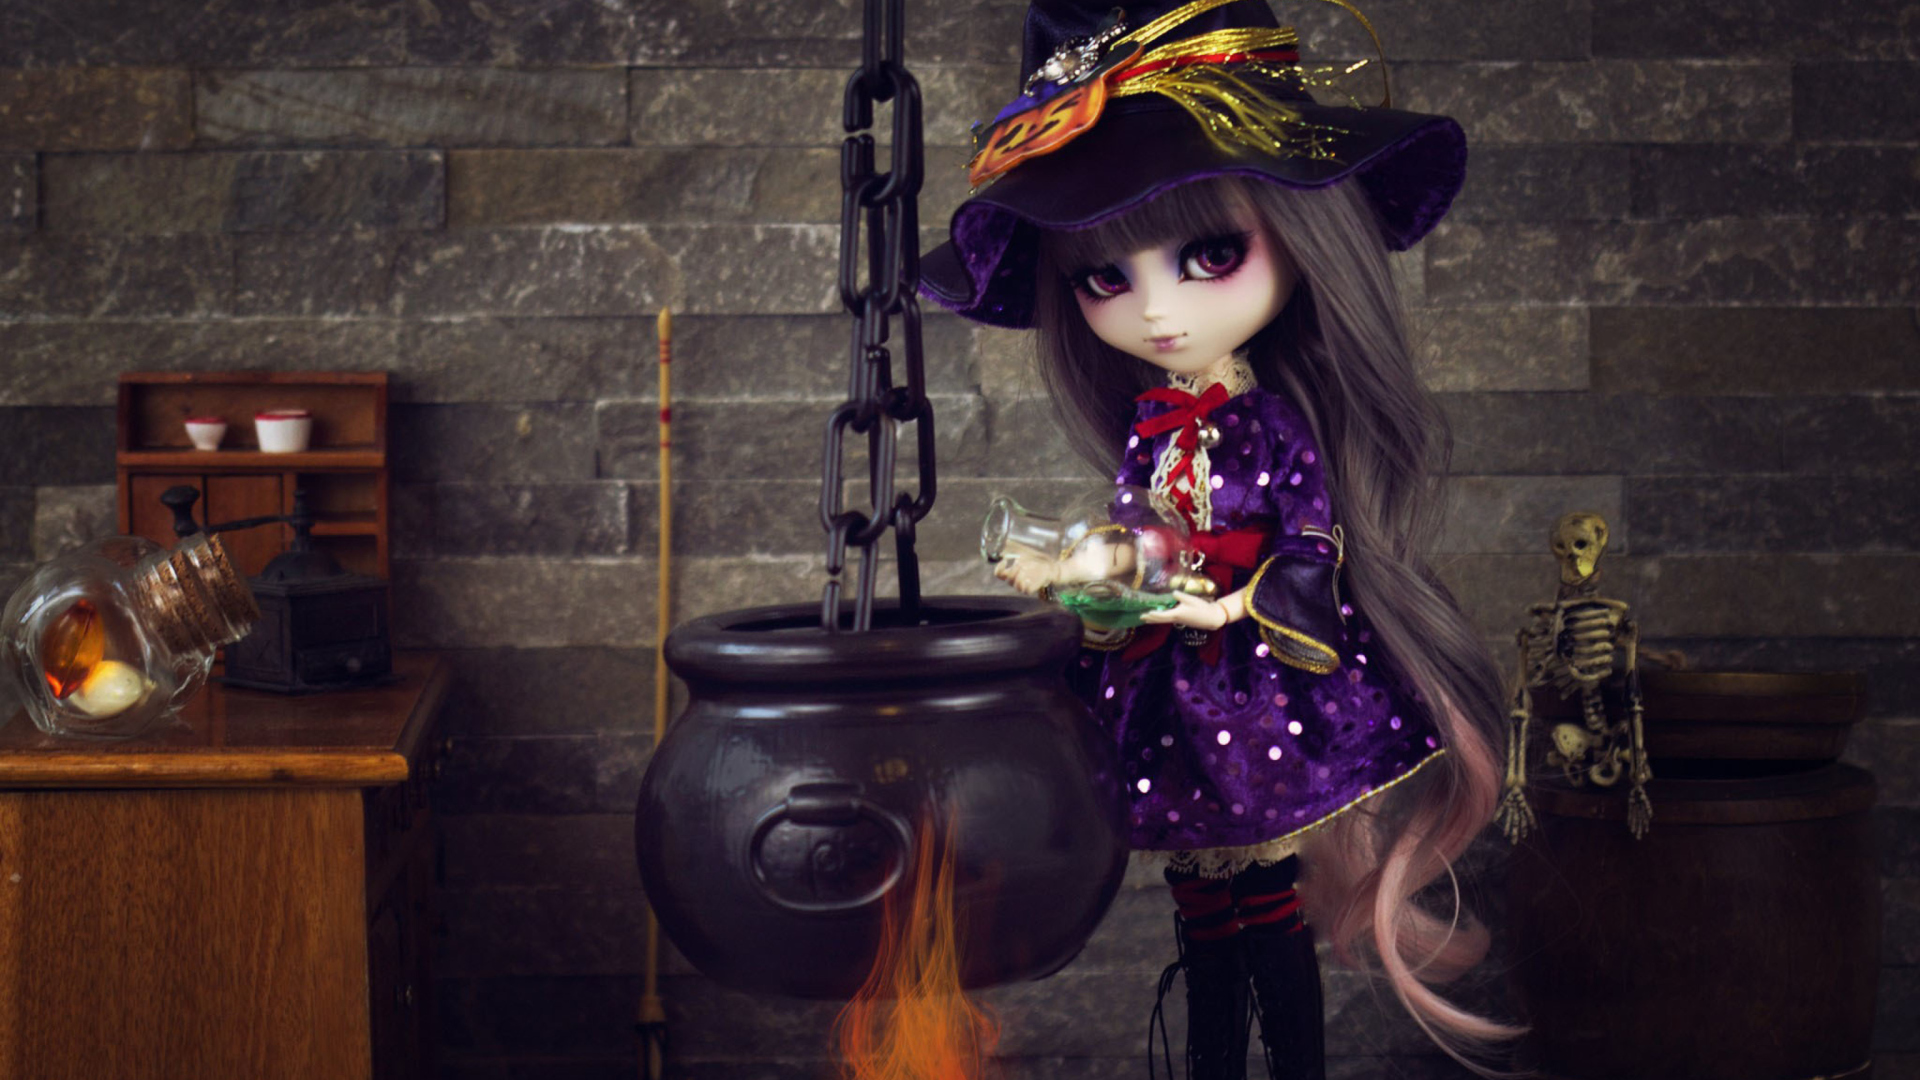 Witch Doll wallpaper 1920x1080